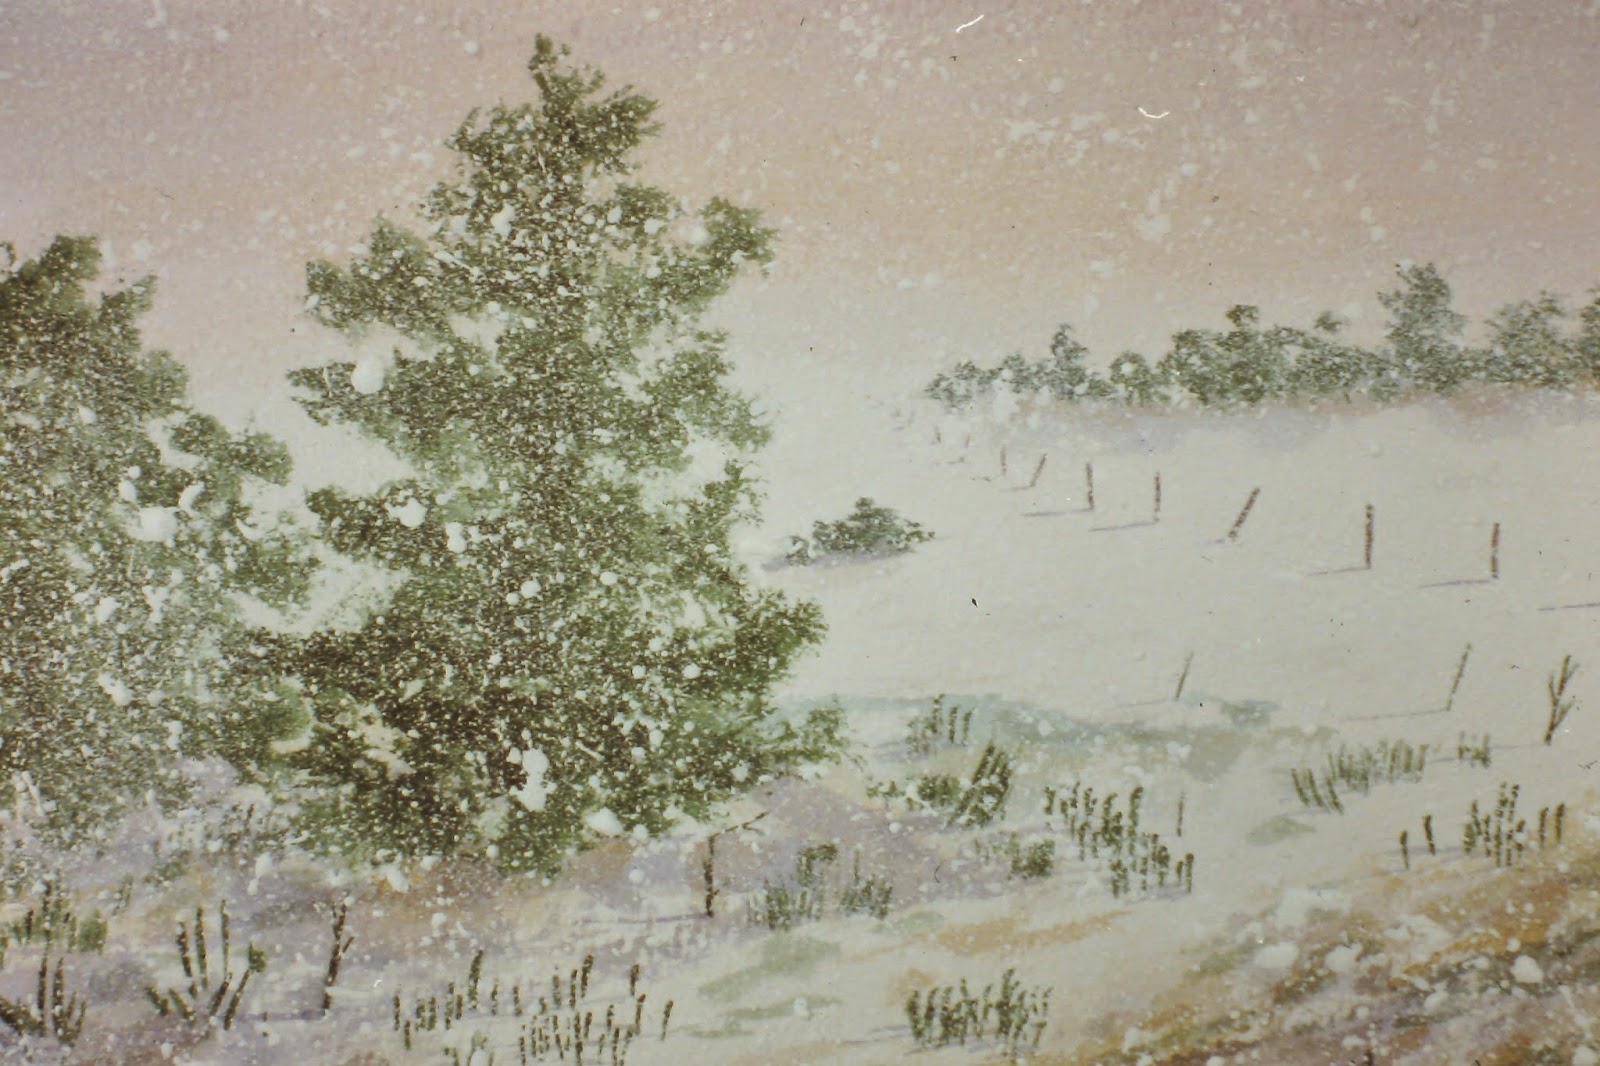 Back Road, near Little Keithock Farmhouse, Angus, Scotland  30x40 inches. Watercolor on paper, c. 1992.  In a private collection in San Diego, California